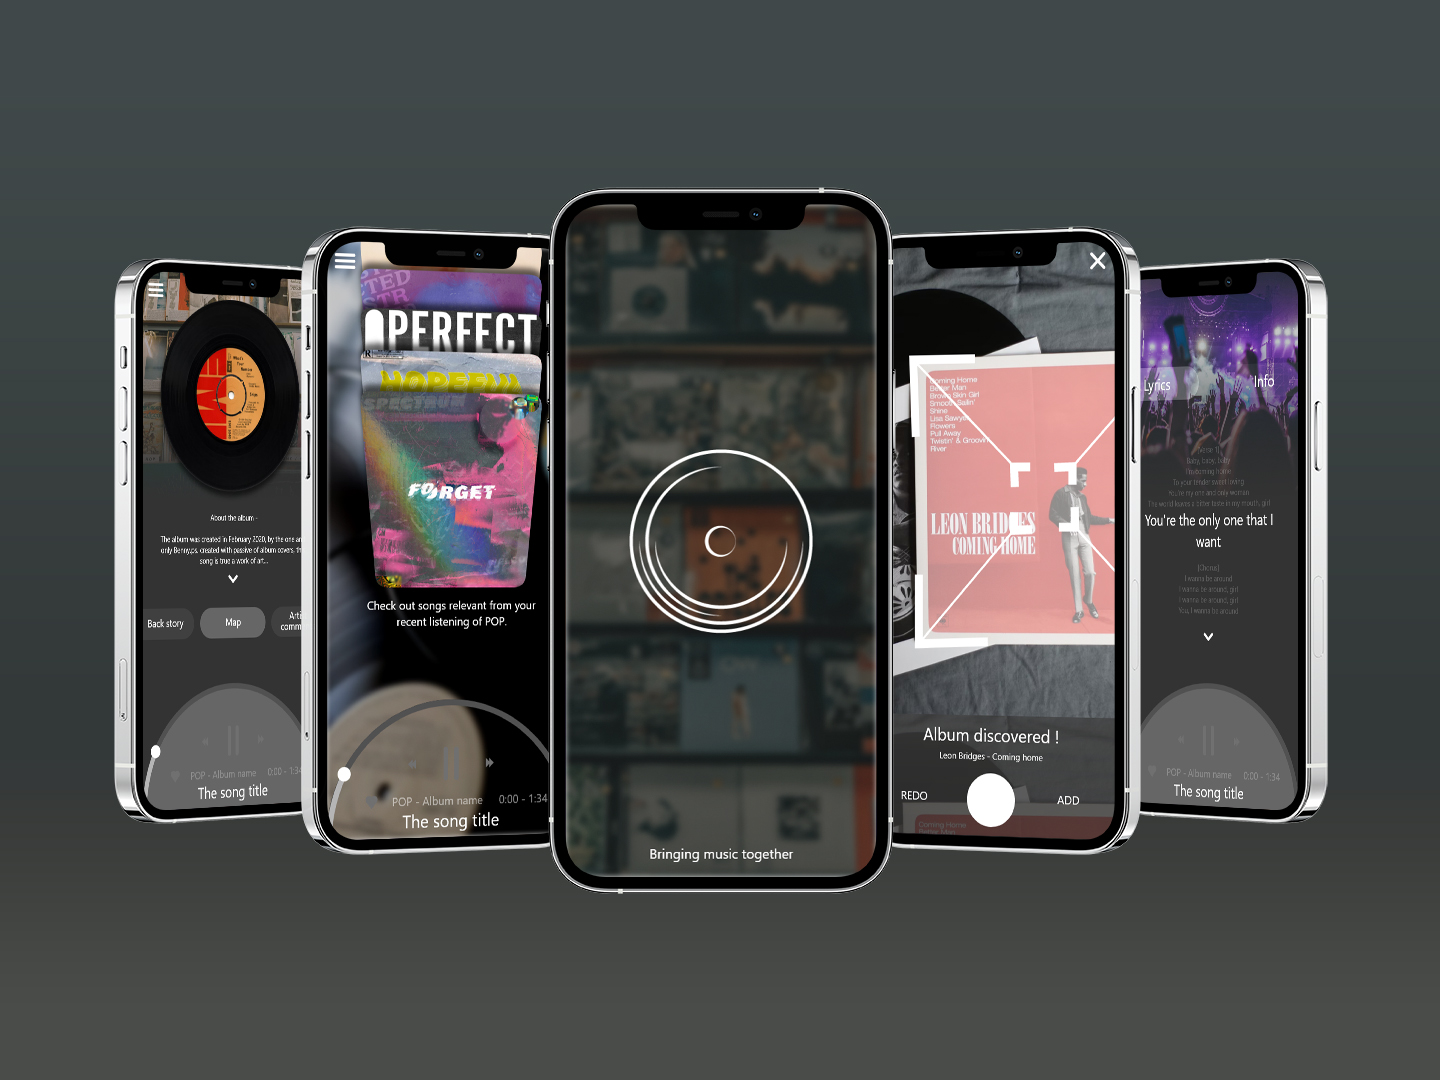 An app designed to join the vesical and digital platforms of music. The music app challenges what modern day technology can do to drive user interaction and experience.